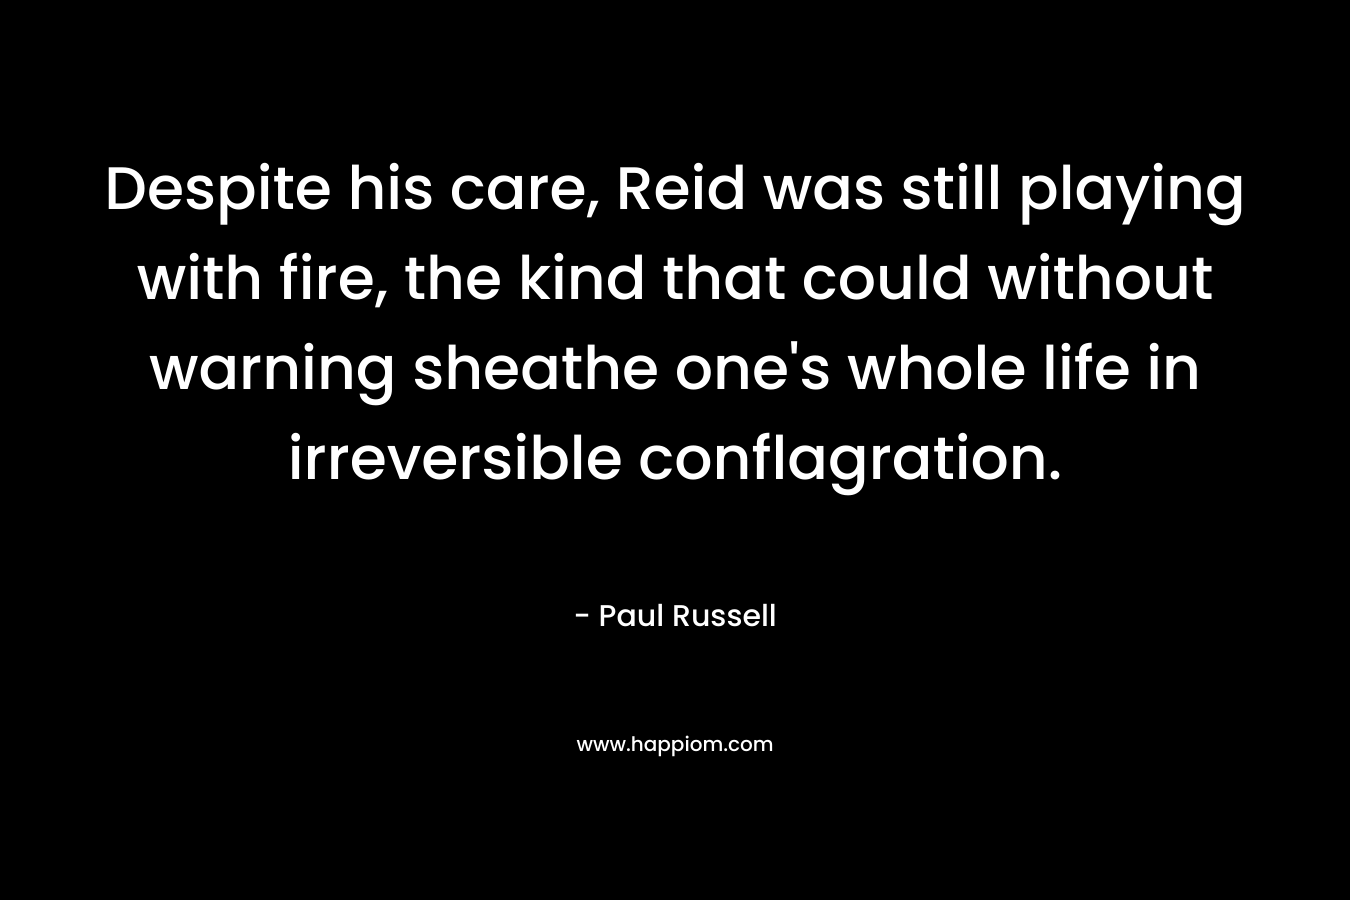 Despite his care, Reid was still playing with fire, the kind that could without warning sheathe one’s whole life in irreversible conflagration. – Paul Russell